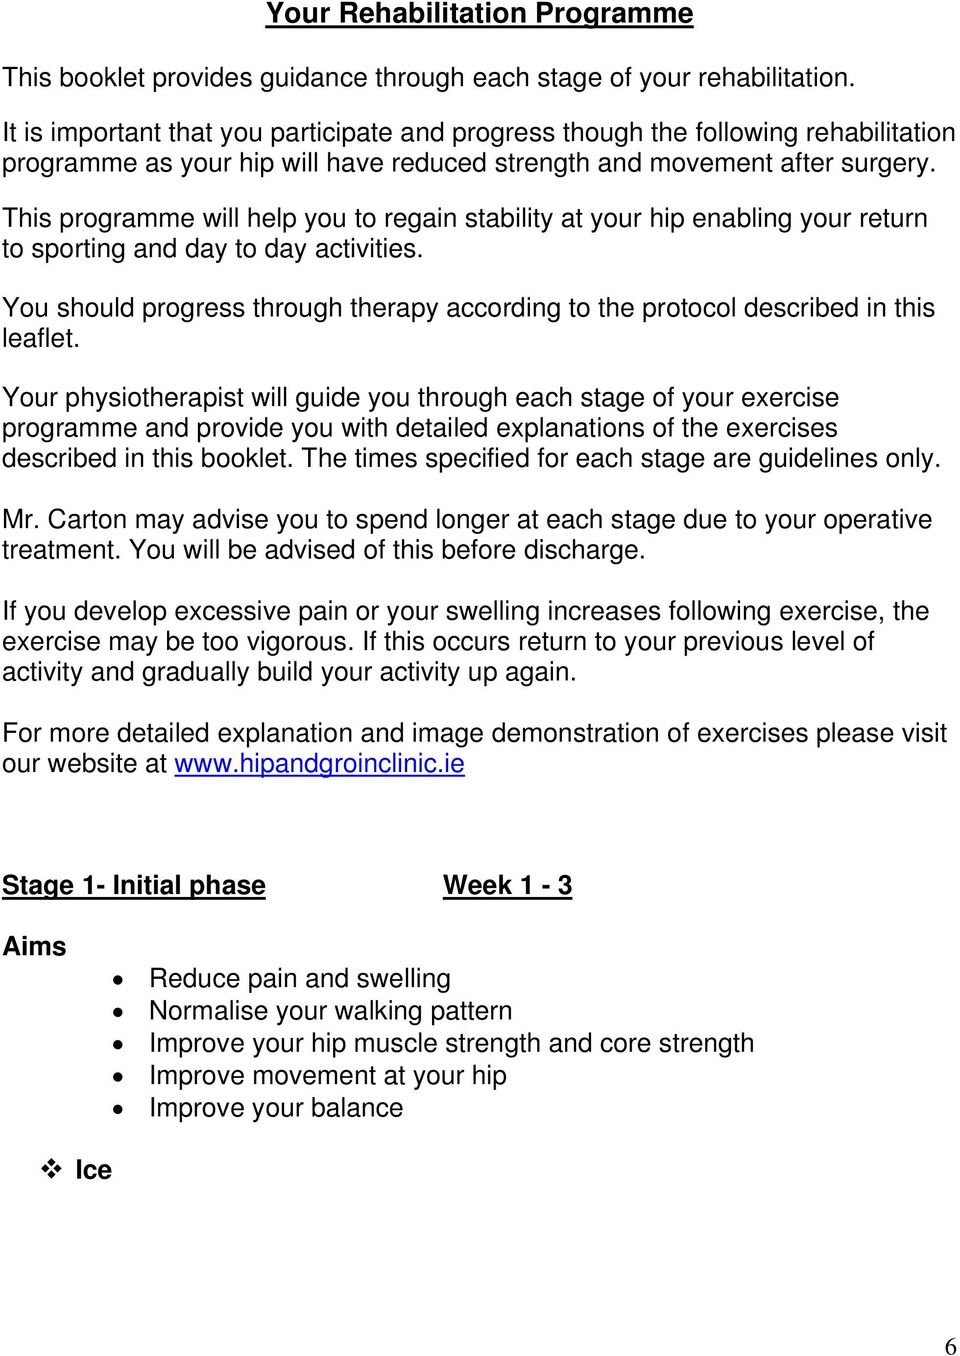 This programme will help you to regain stability at your hip enabling your return to sporting and day to day activities.